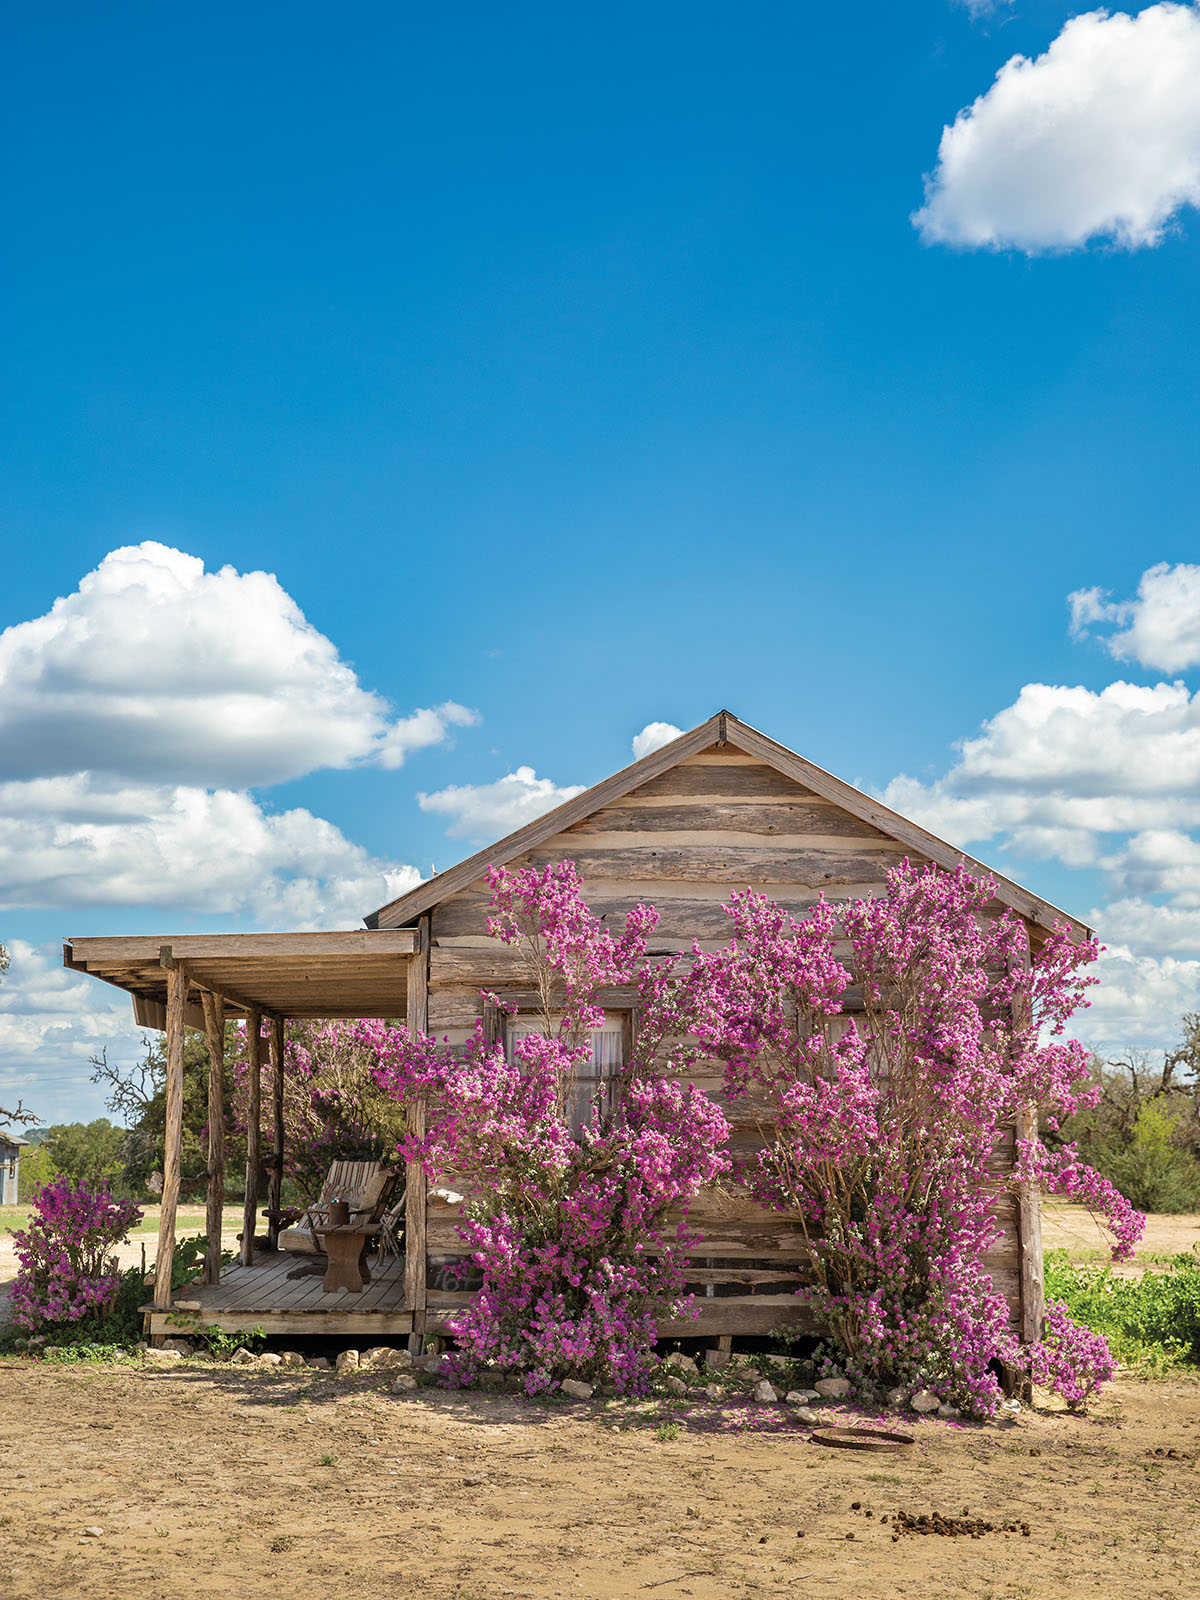 The exterior of a log cabin-style building under blue sky with a large bright purple sage in front